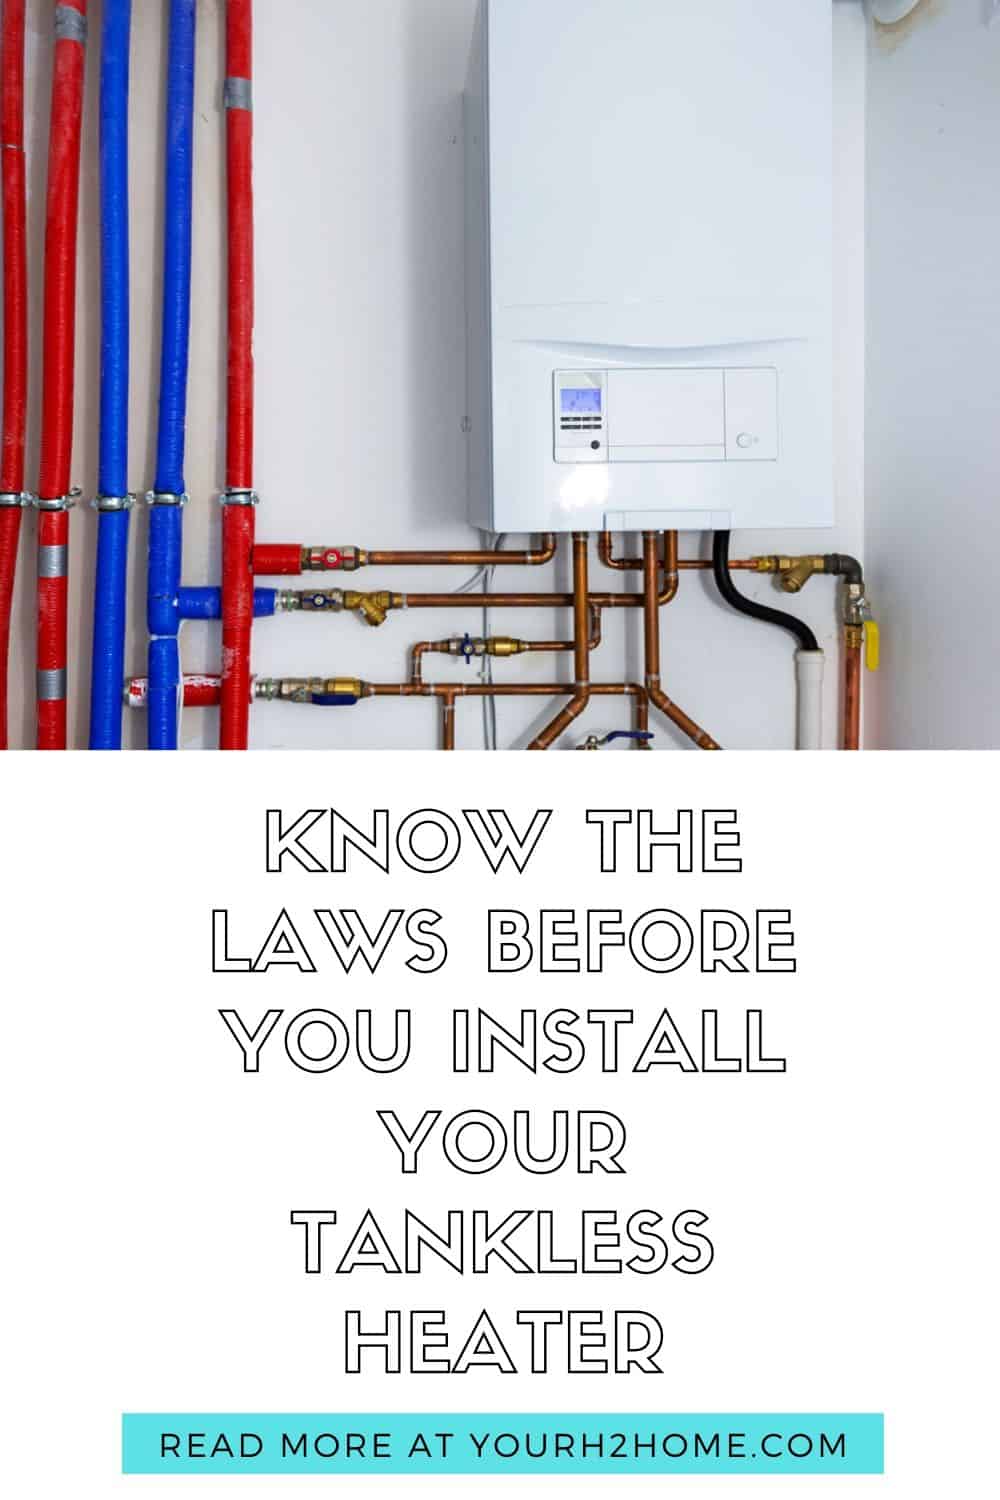 Tankless Hot Water Heater Installation What Are The Requirements